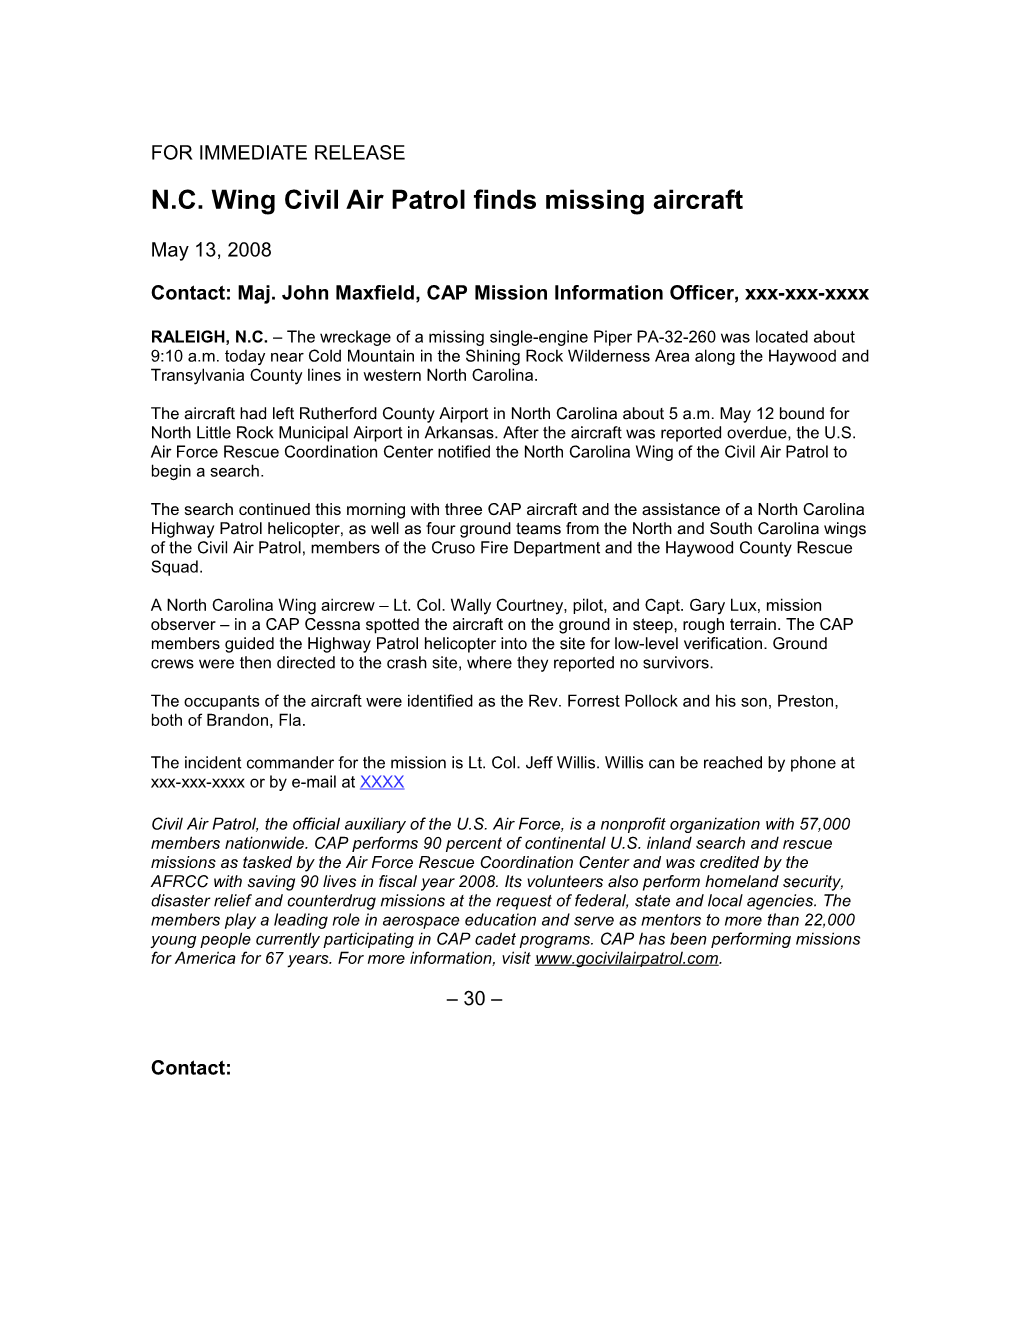 N.C. Wing Civil Air Patrol Finds Missing Aircraft